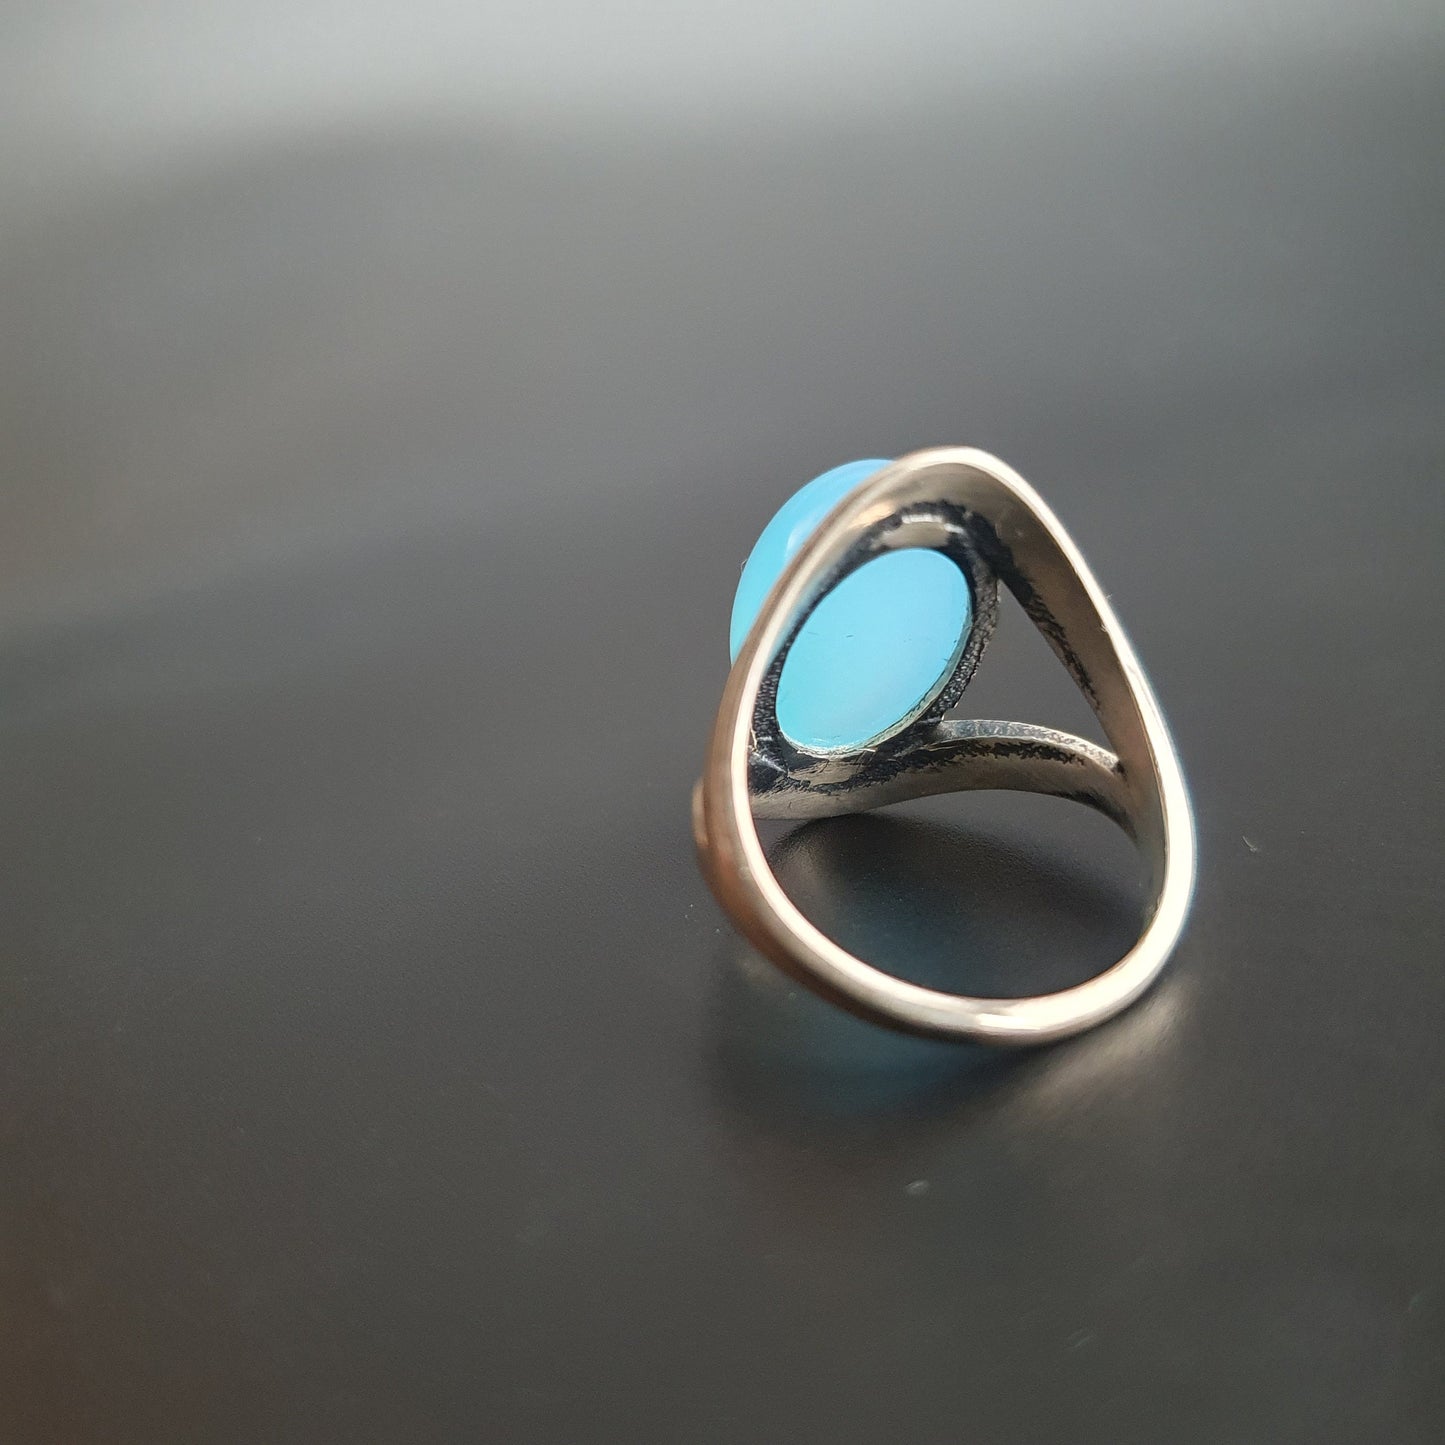 Silver ring, sterling, chalcedony,blue, beautiful, authentic,rings, jewelry, gifts, vintage, handmade,luxury, fast shipping, exclusive,925